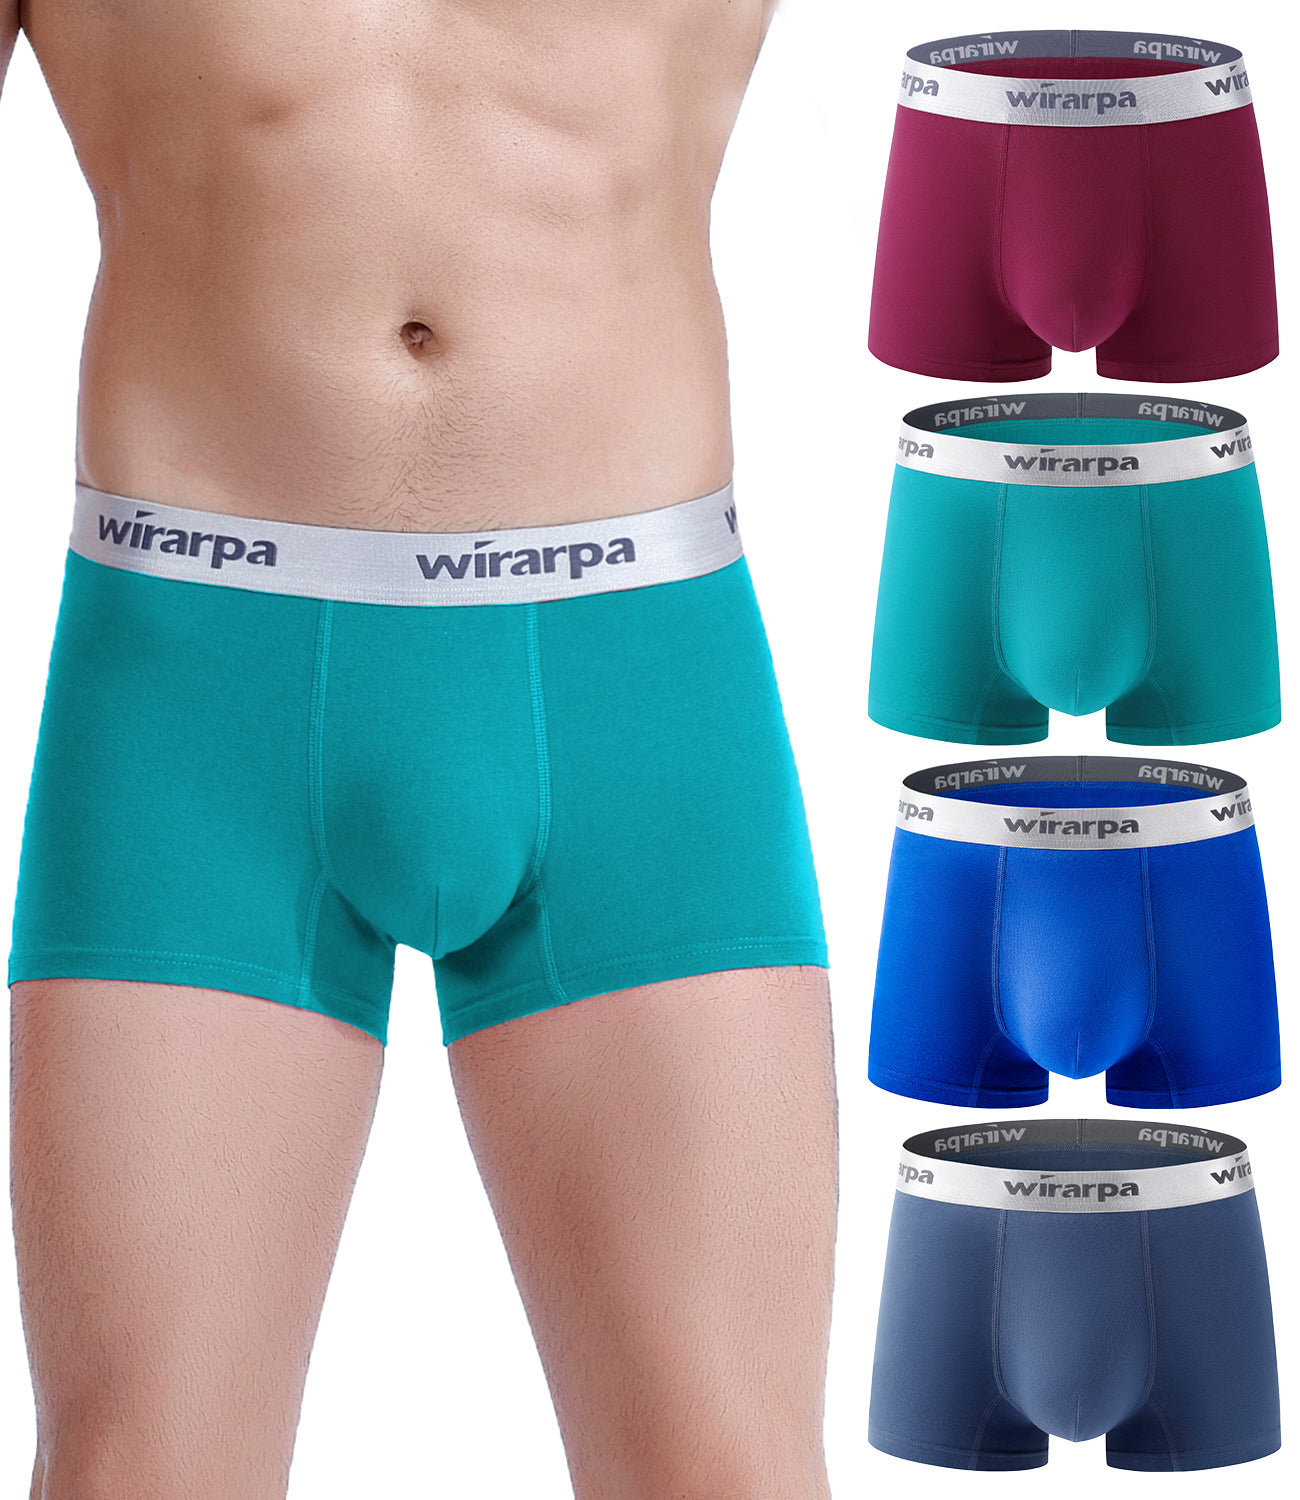 wirarpa Men's Cotton Stretch Briefs Underwear Soft Wide Waistband Support  No Fly Underpants Multicolored 4 Pack Small at  Men's Clothing store